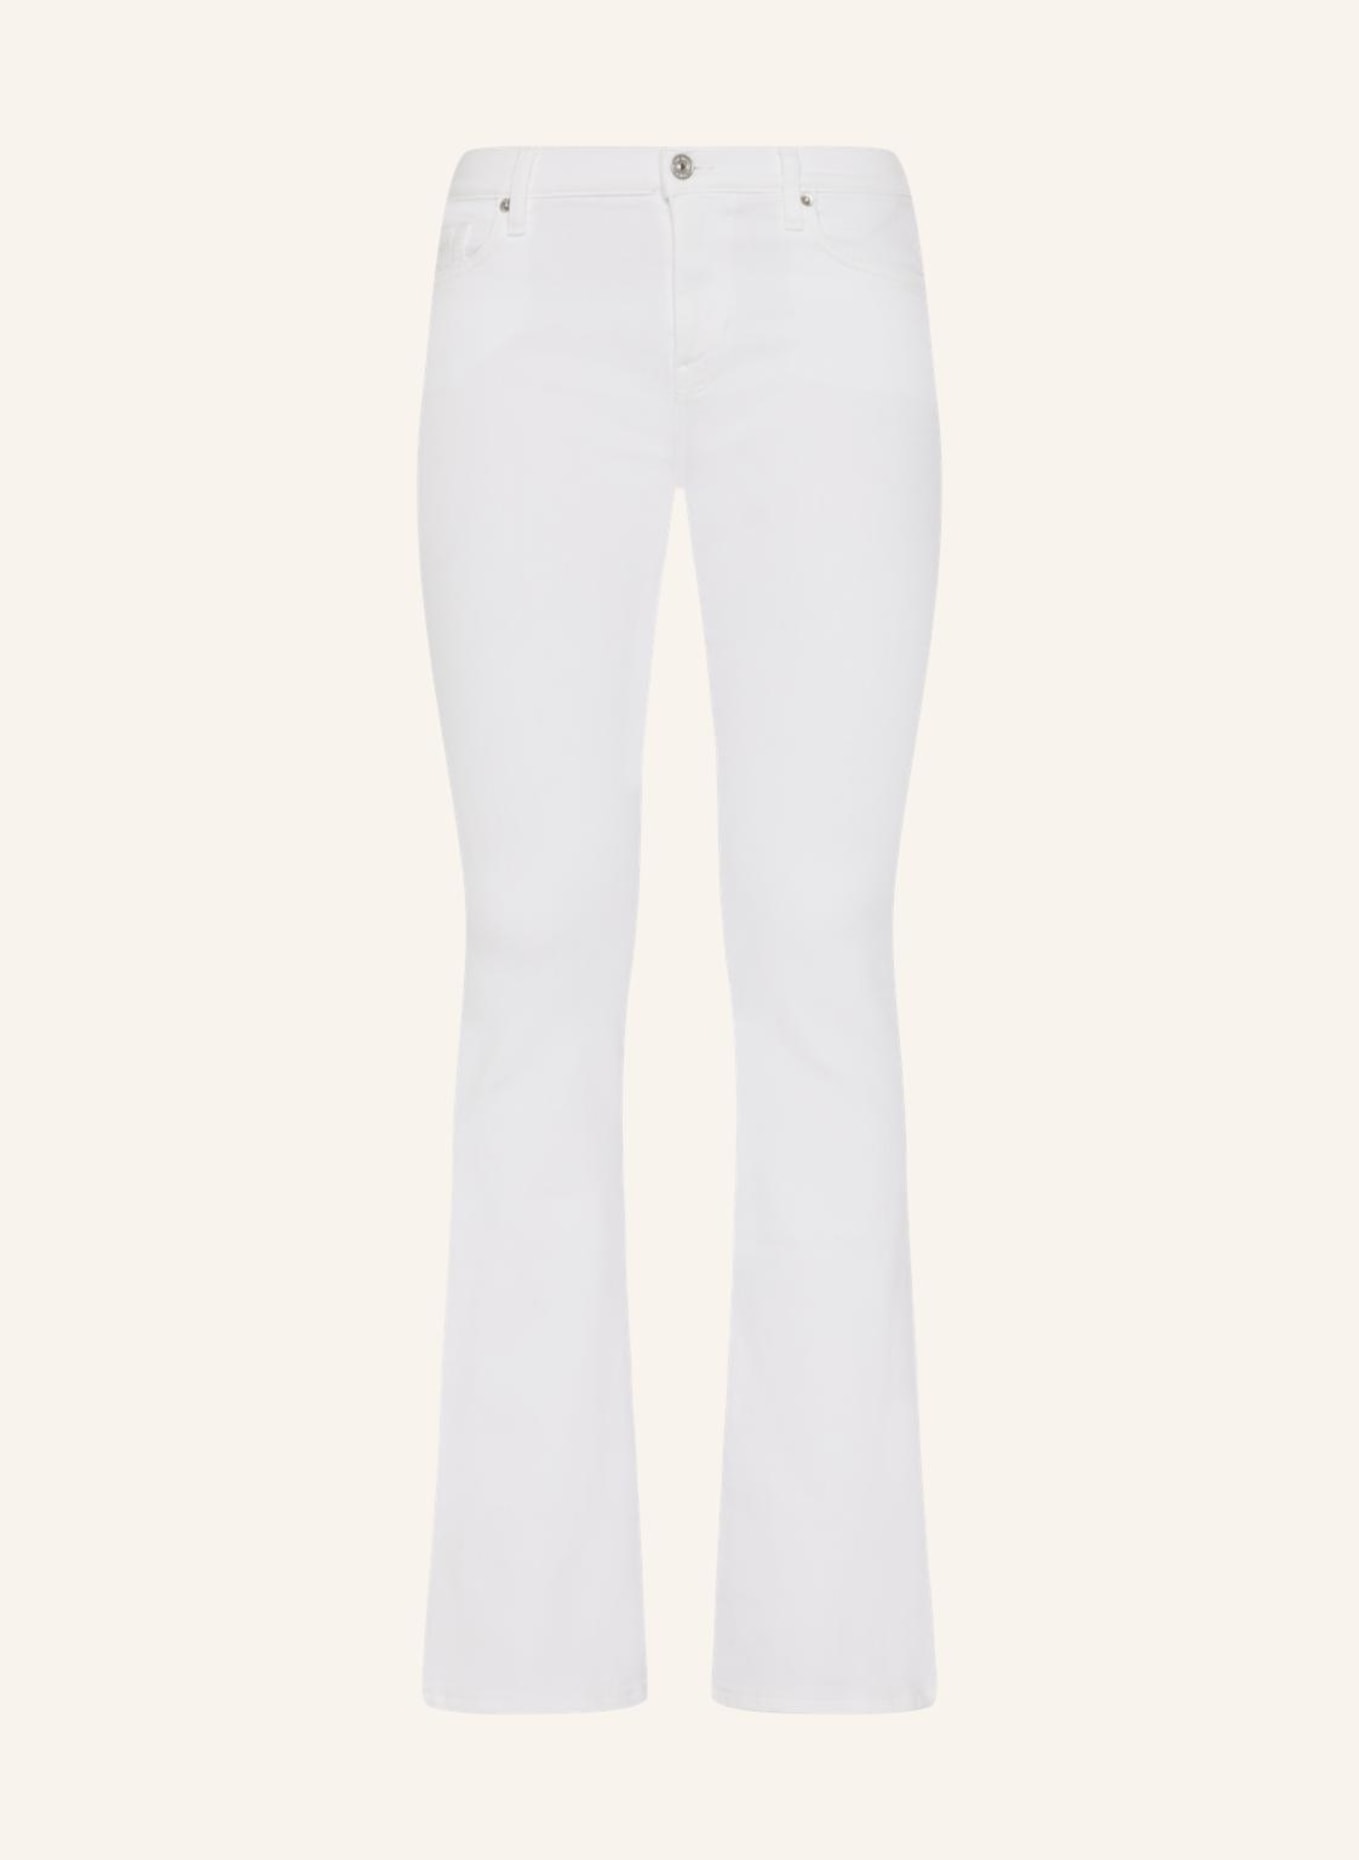 7 for all mankind Jeans HW ALI Flare fit, Farbe: WEISS (Bild 1)